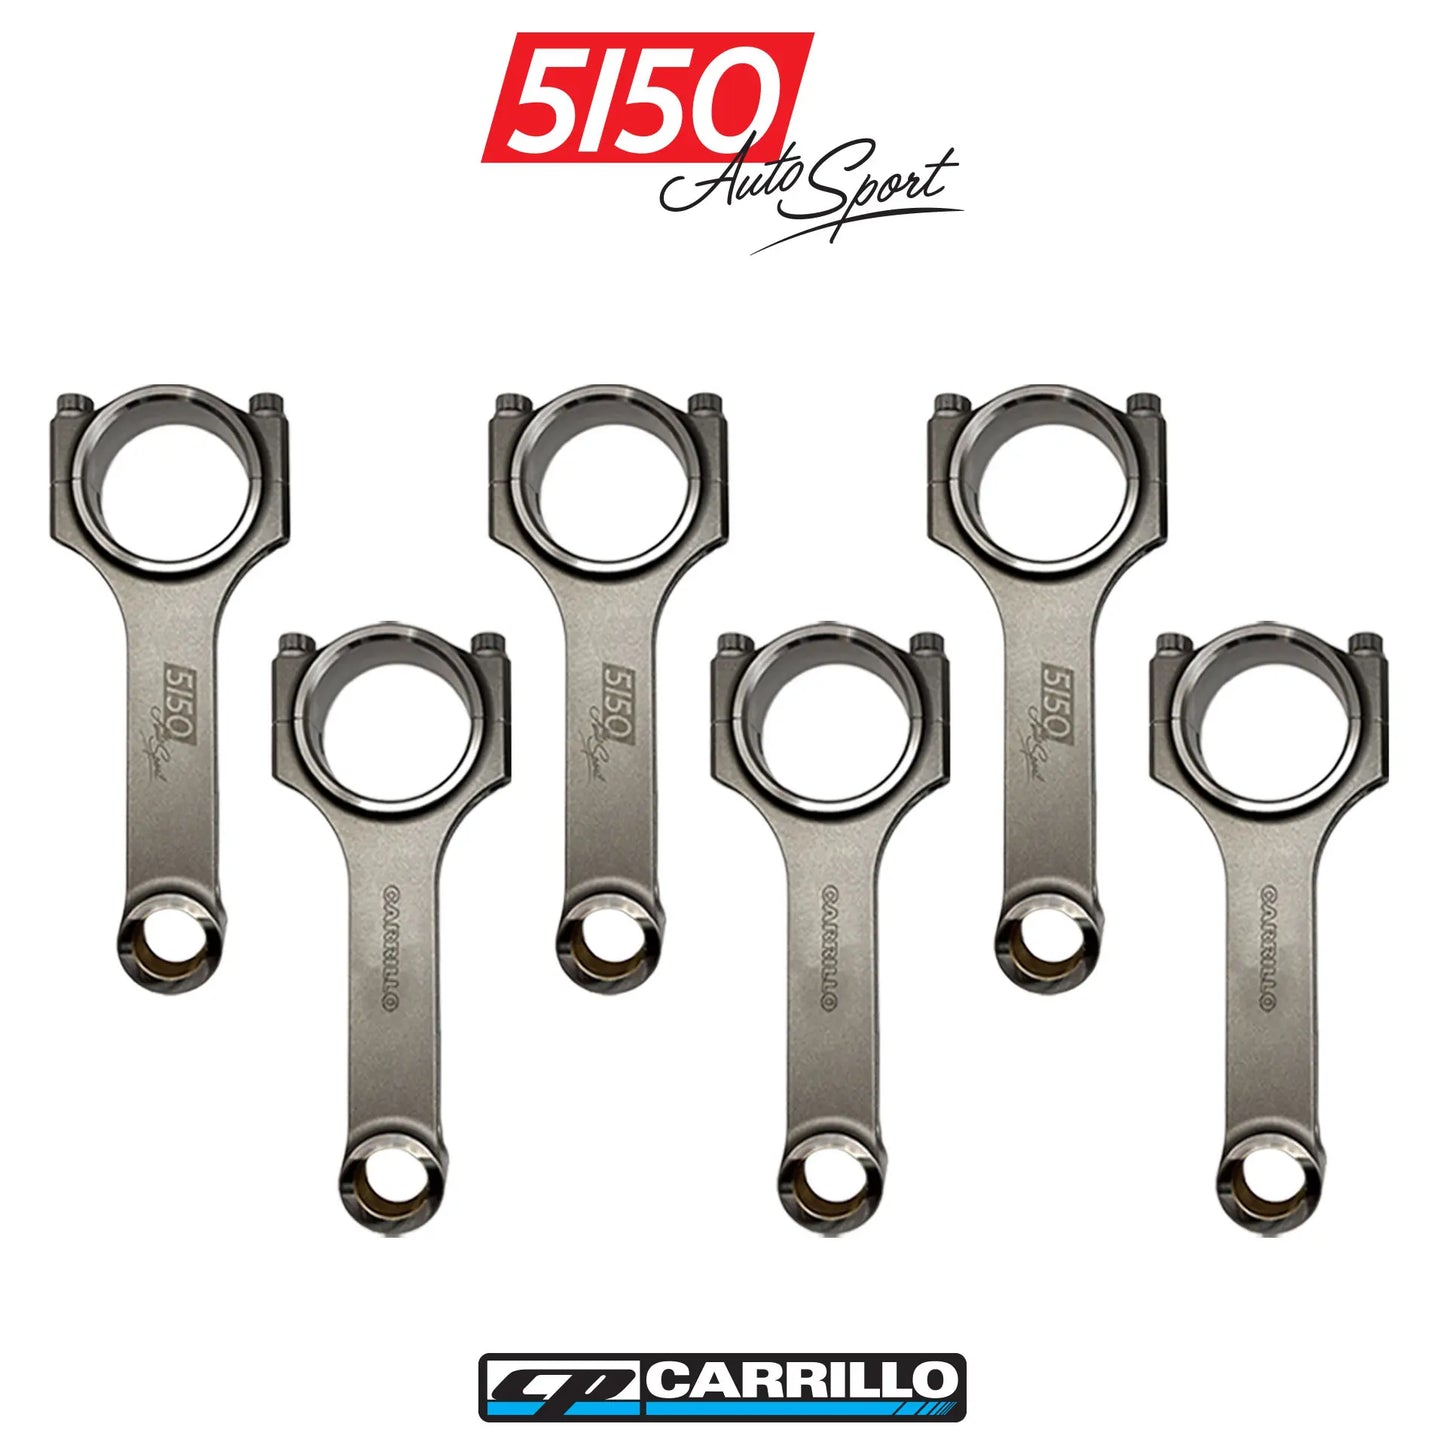 CP-Carrillo Forged 139mm Connecting Rod Set for BMW S54 Pro-Xtreme Turbo